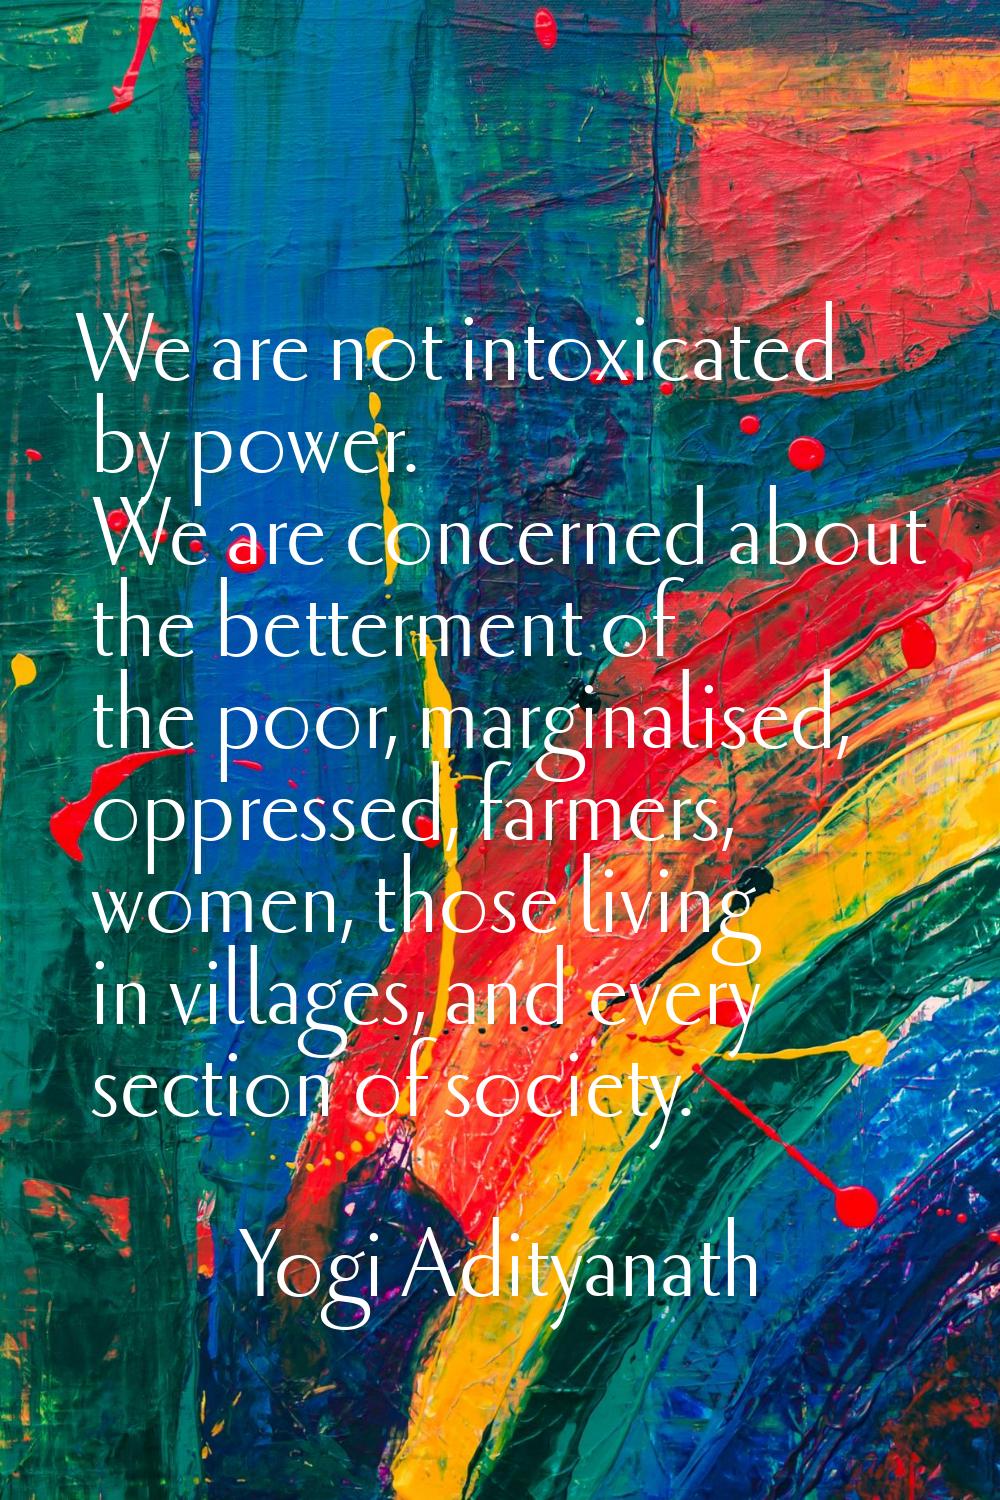 We are not intoxicated by power. We are concerned about the betterment of the poor, marginalised, o